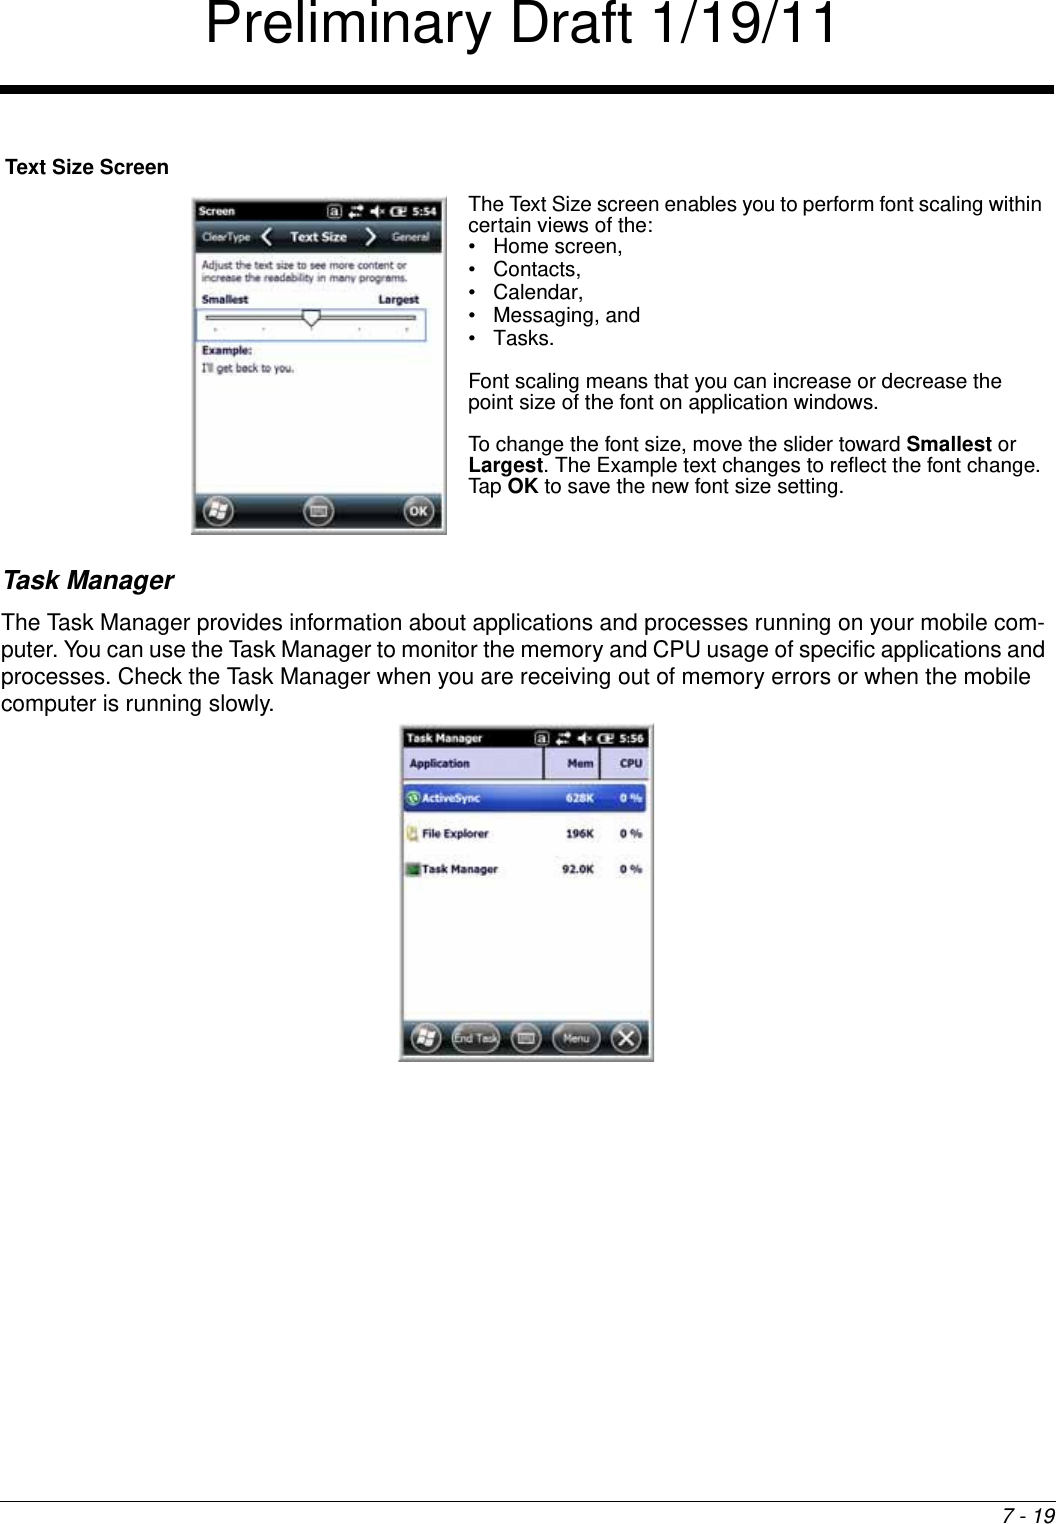 7 - 19Task ManagerThe Task Manager provides information about applications and processes running on your mobile com-puter. You can use the Task Manager to monitor the memory and CPU usage of specific applications and processes. Check the Task Manager when you are receiving out of memory errors or when the mobile computer is running slowly. Text Size ScreenThe Text Size screen enables you to perform font scaling within certain views of the: • Home screen, • Contacts, • Calendar, • Messaging, and •Tasks. Font scaling means that you can increase or decrease the point size of the font on application windows.To change the font size, move the slider toward Smallest or Largest. The Example text changes to reflect the font change. Tap OK to save the new font size setting. Preliminary Draft 1/19/11